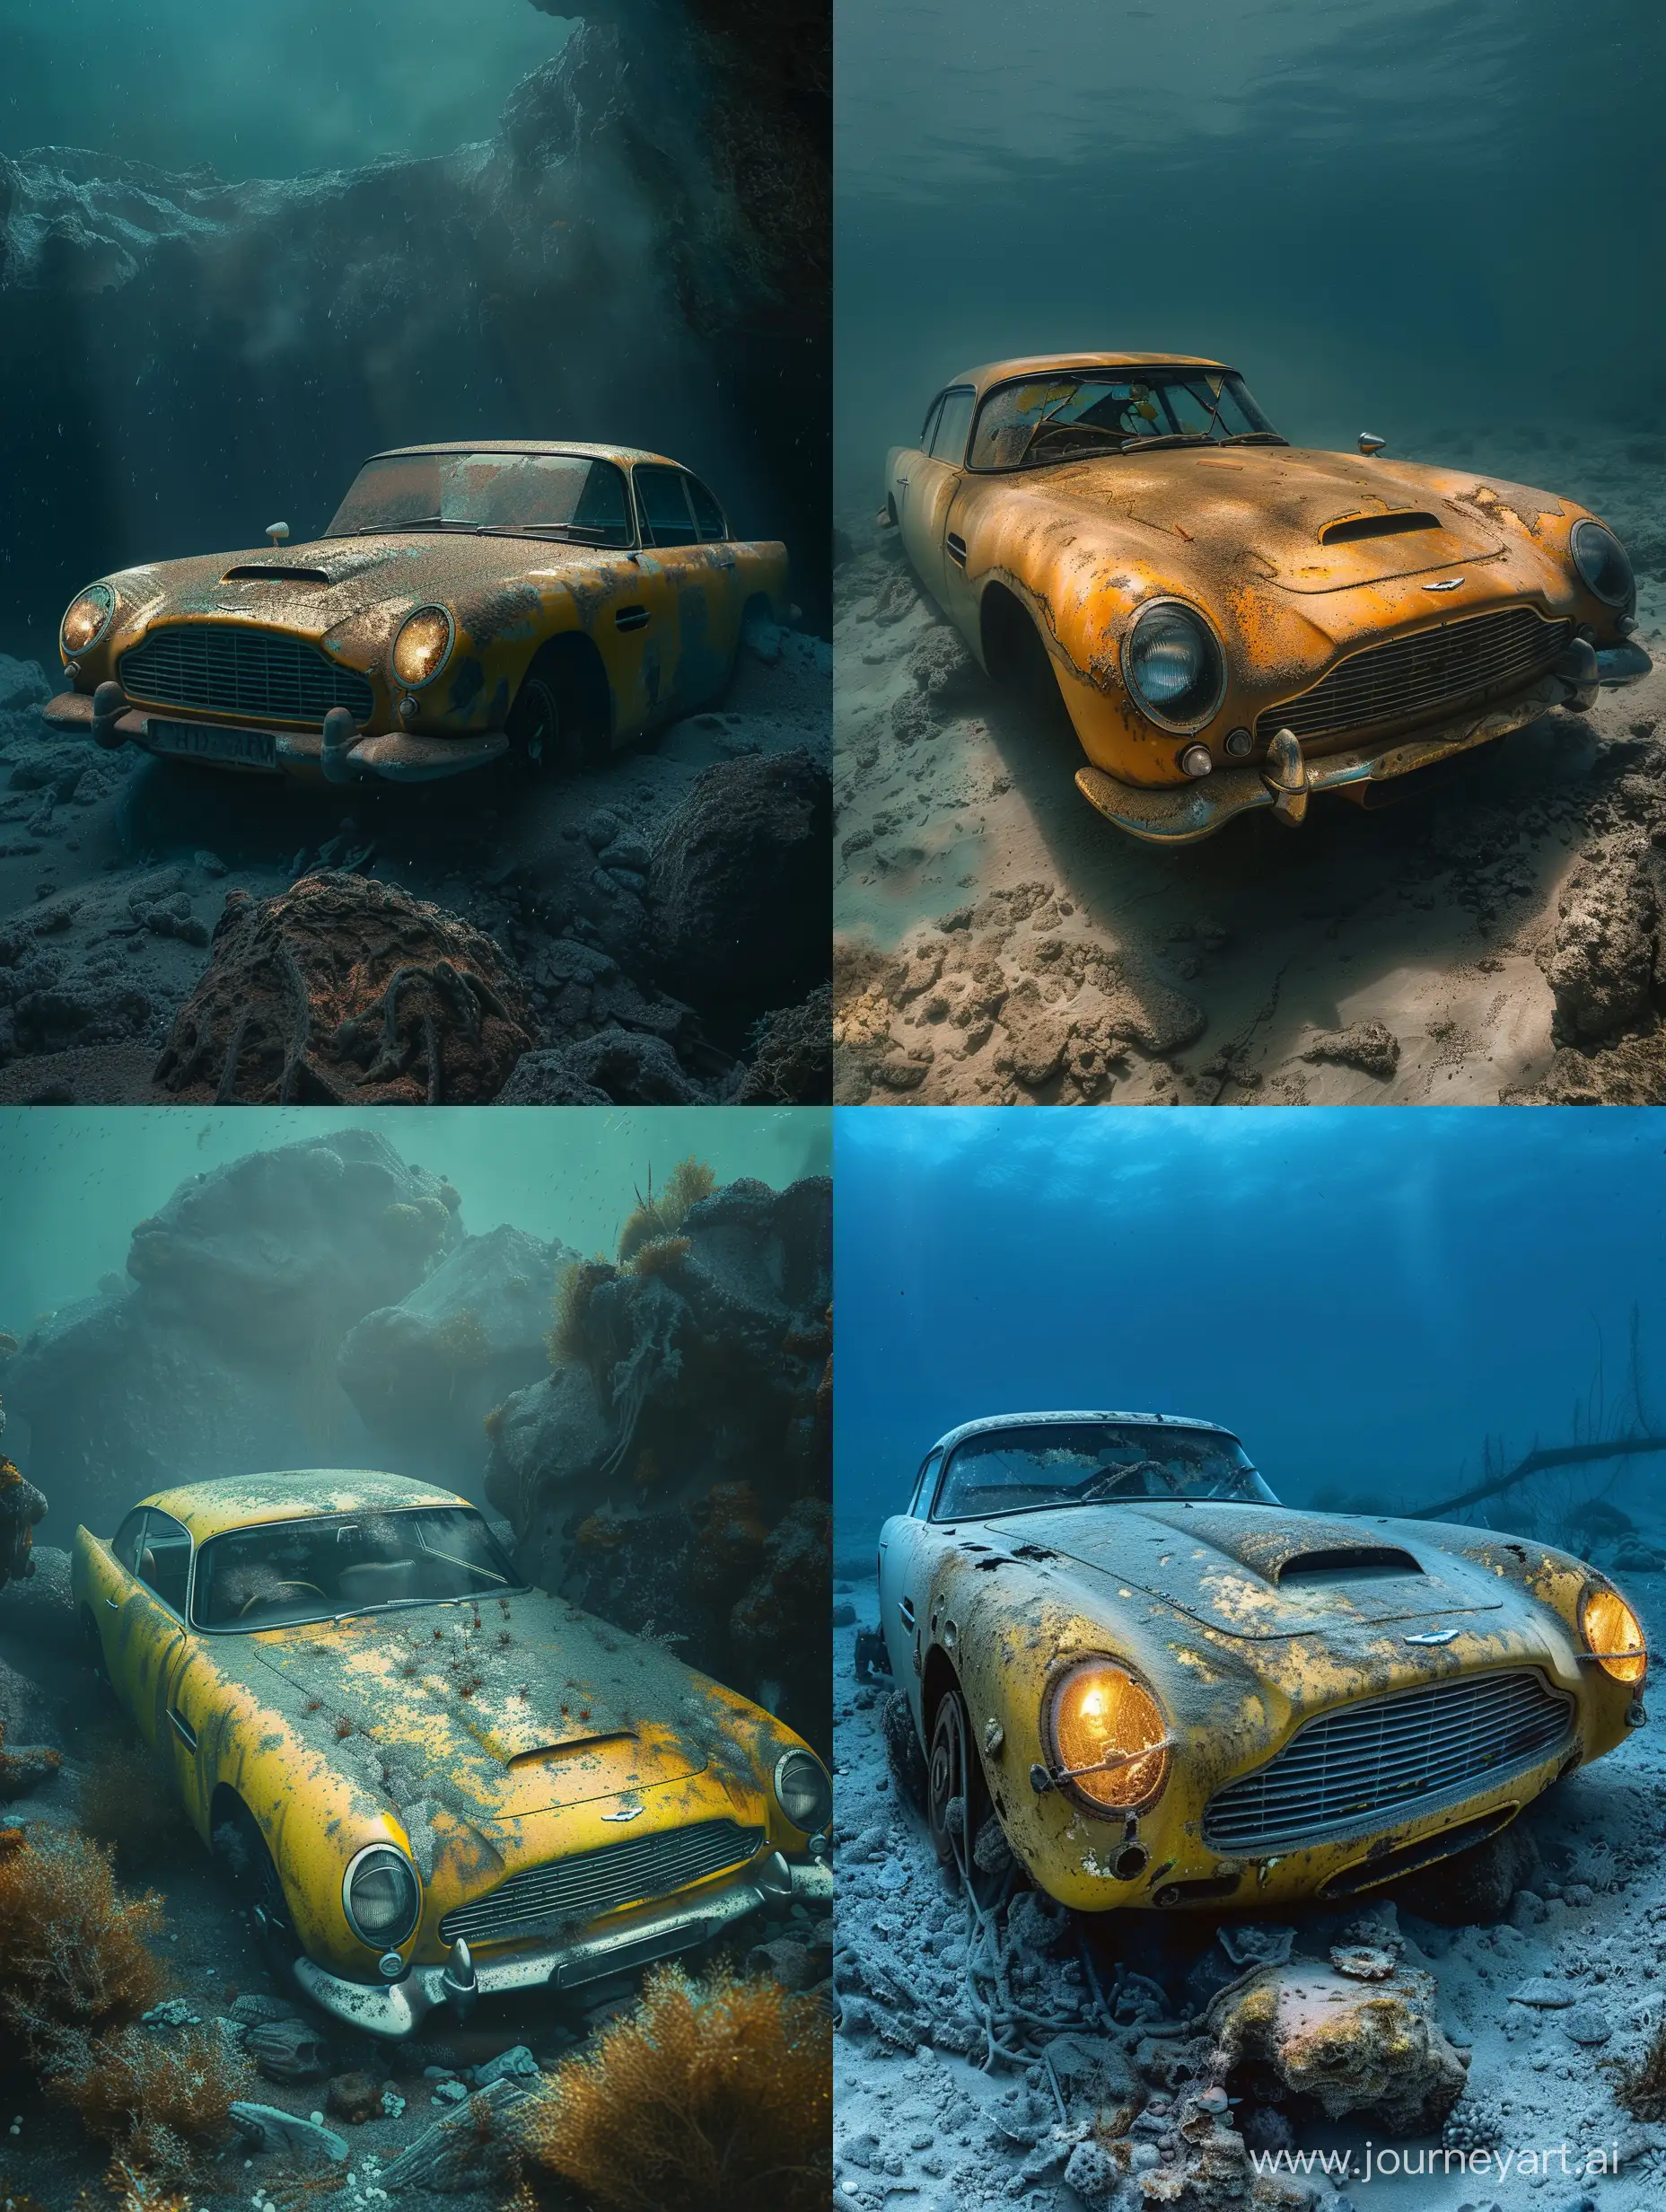 Photographic and hyperrealistic style of an old Aston Martin car driving along the seabed, exploring it, the car is yellow, it is rusty but still has the lights on, by Rafael Fernández:: 2 --style raw 